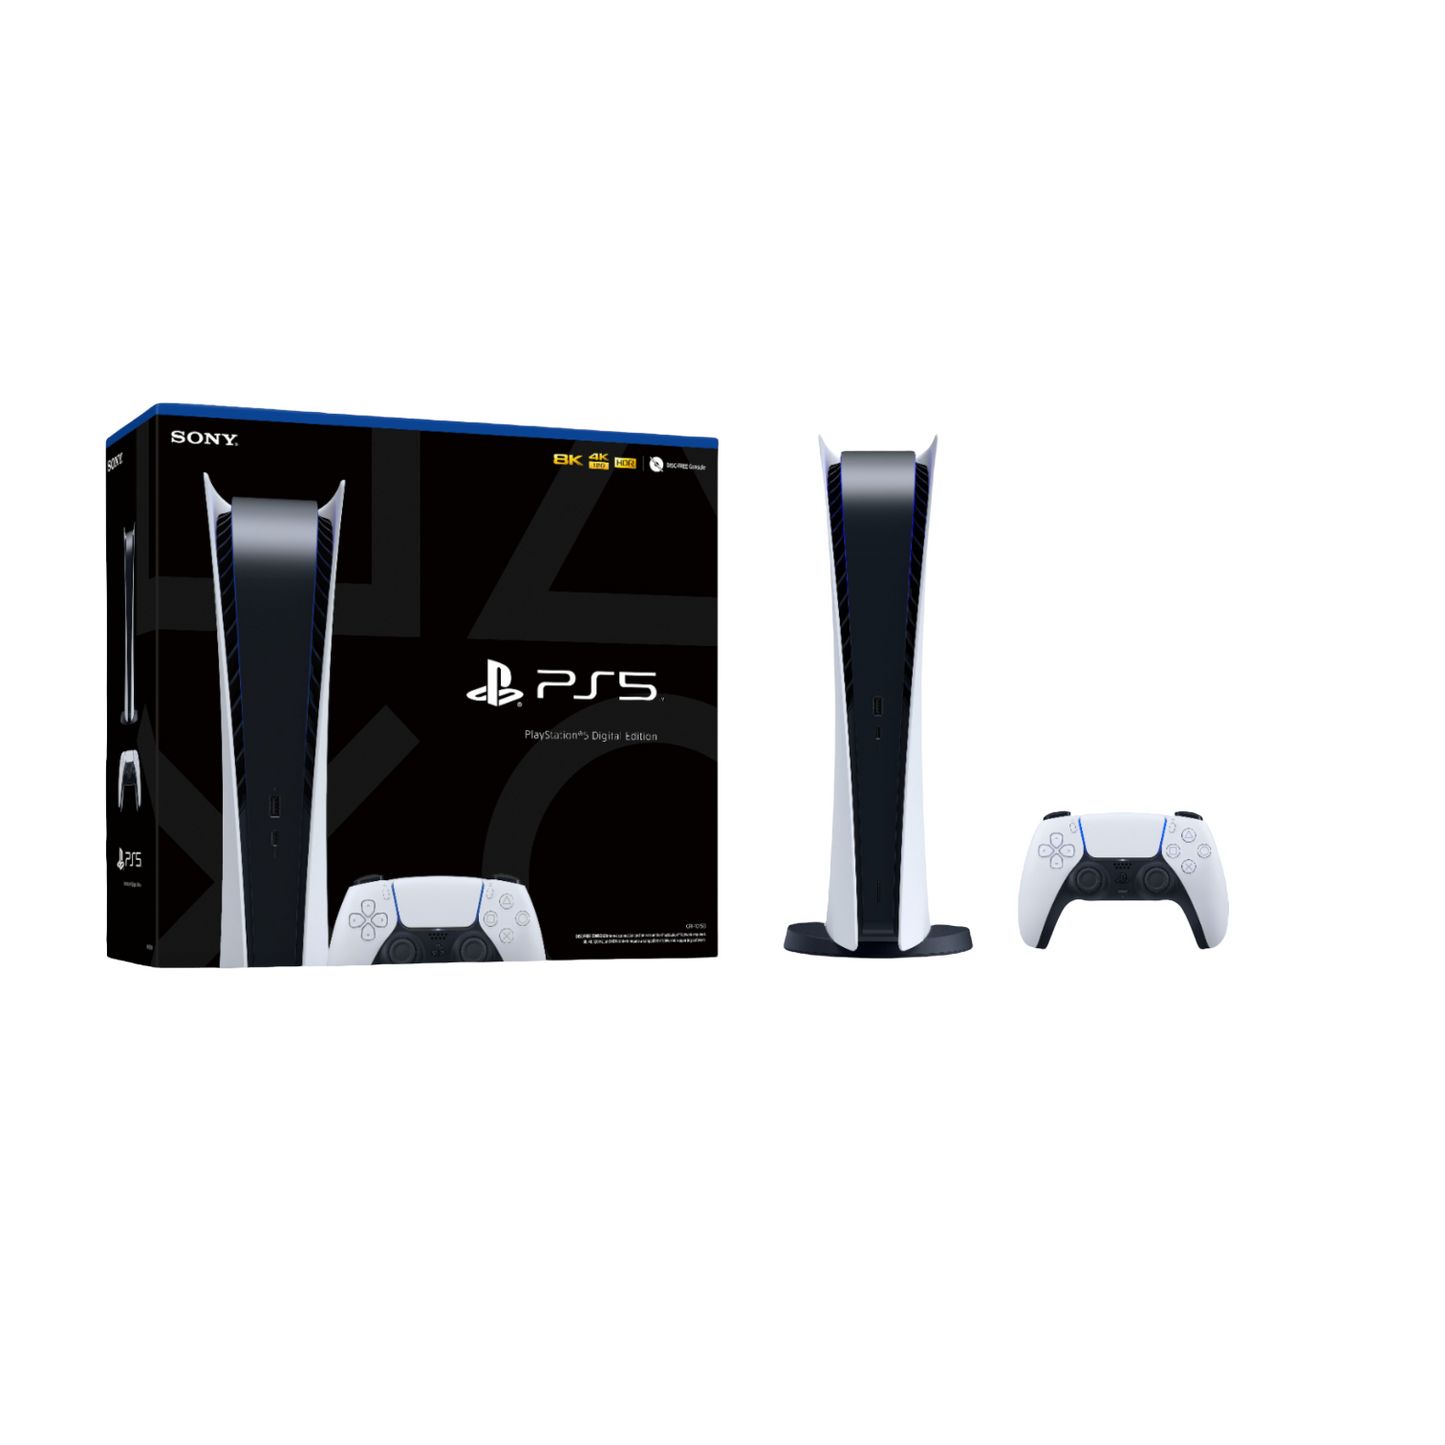 Kenyatronics - CHRISTMAS SALE! Enjoy best prices on Sony PS5 SLIM Gaming  Console and games only @ Kenyatronics.com. Explore uncharted virtual  territories and slay dragons with this sleek Sony PlayStation 5 gaming